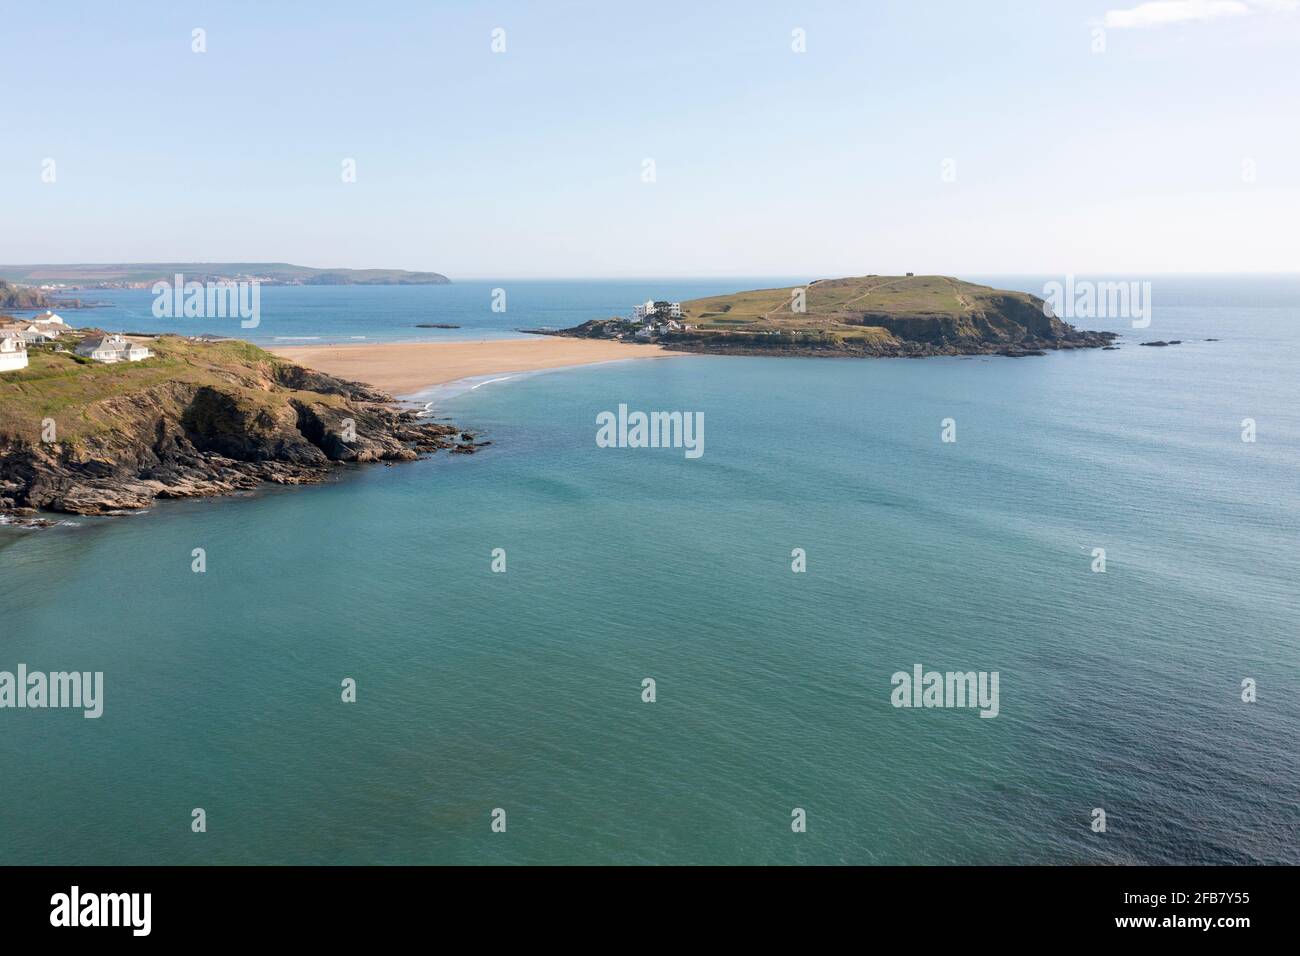 Burgh Island at low tide, Bigbury, South Devon. When the tide is in the island is only accessible by a purpose built tractor. Stock Photo